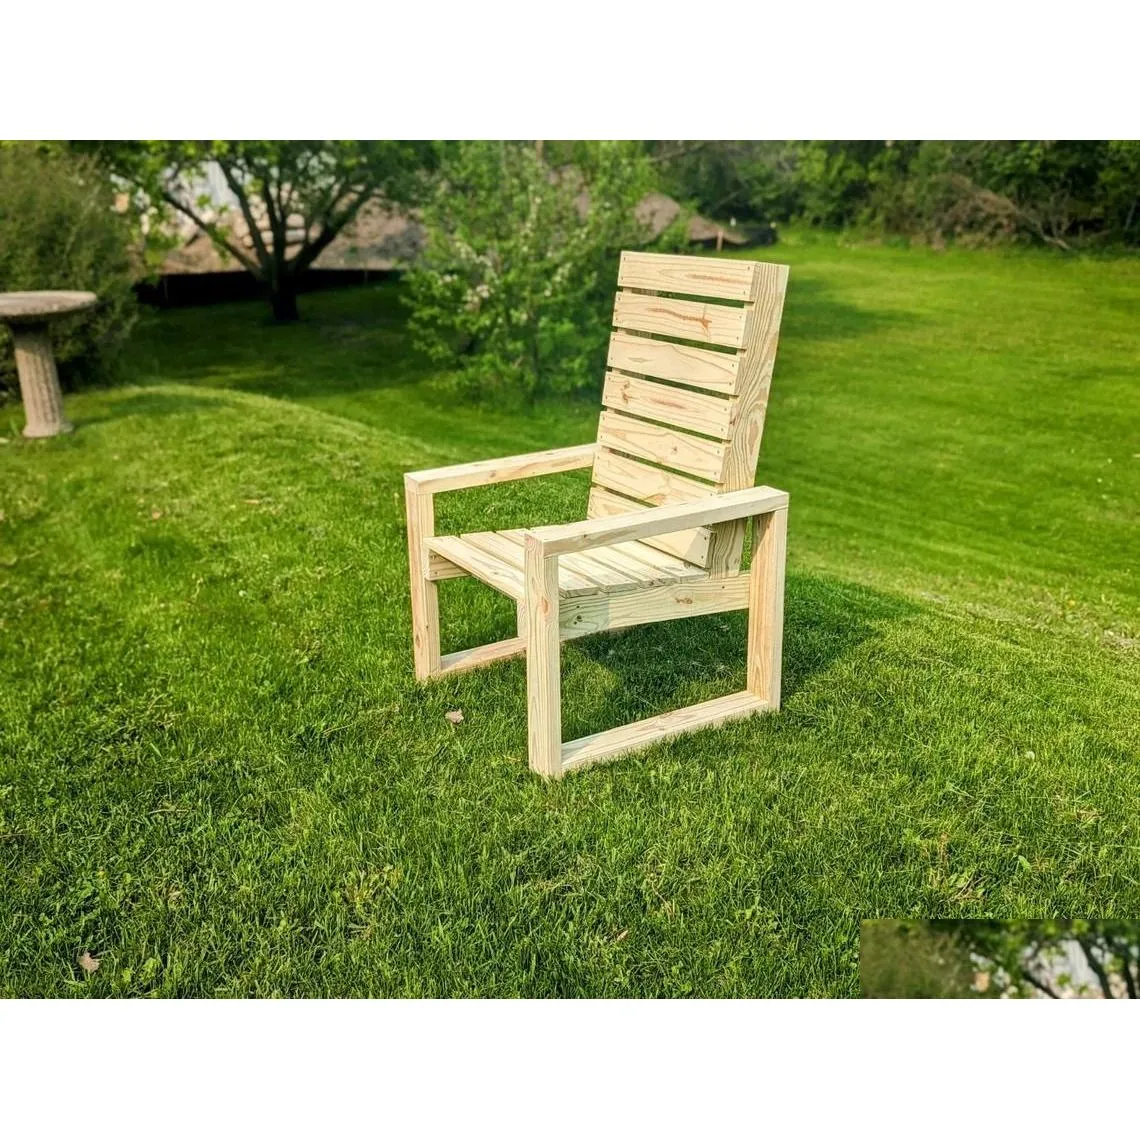 Andra möbler DIY Patio Chair Woodworking Drop Delivery Home Garden Furniture Othpo